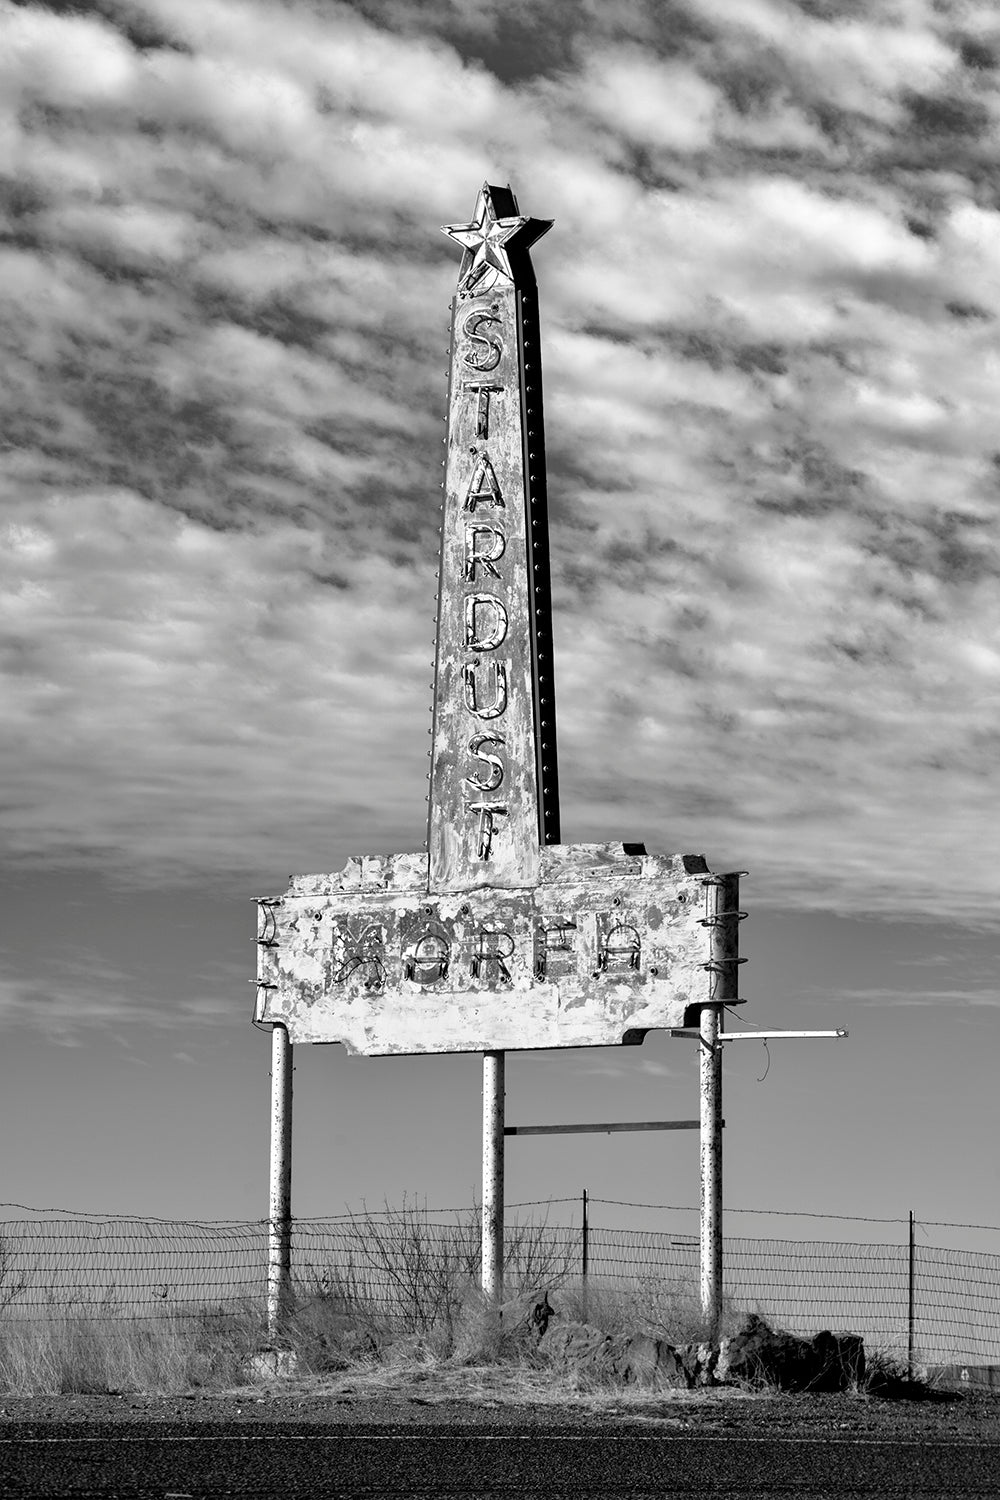 Old Stardust Motel Sign in Marfa, Texas: Black and White Photograph by Keith Dotson. Buy a fine art print.